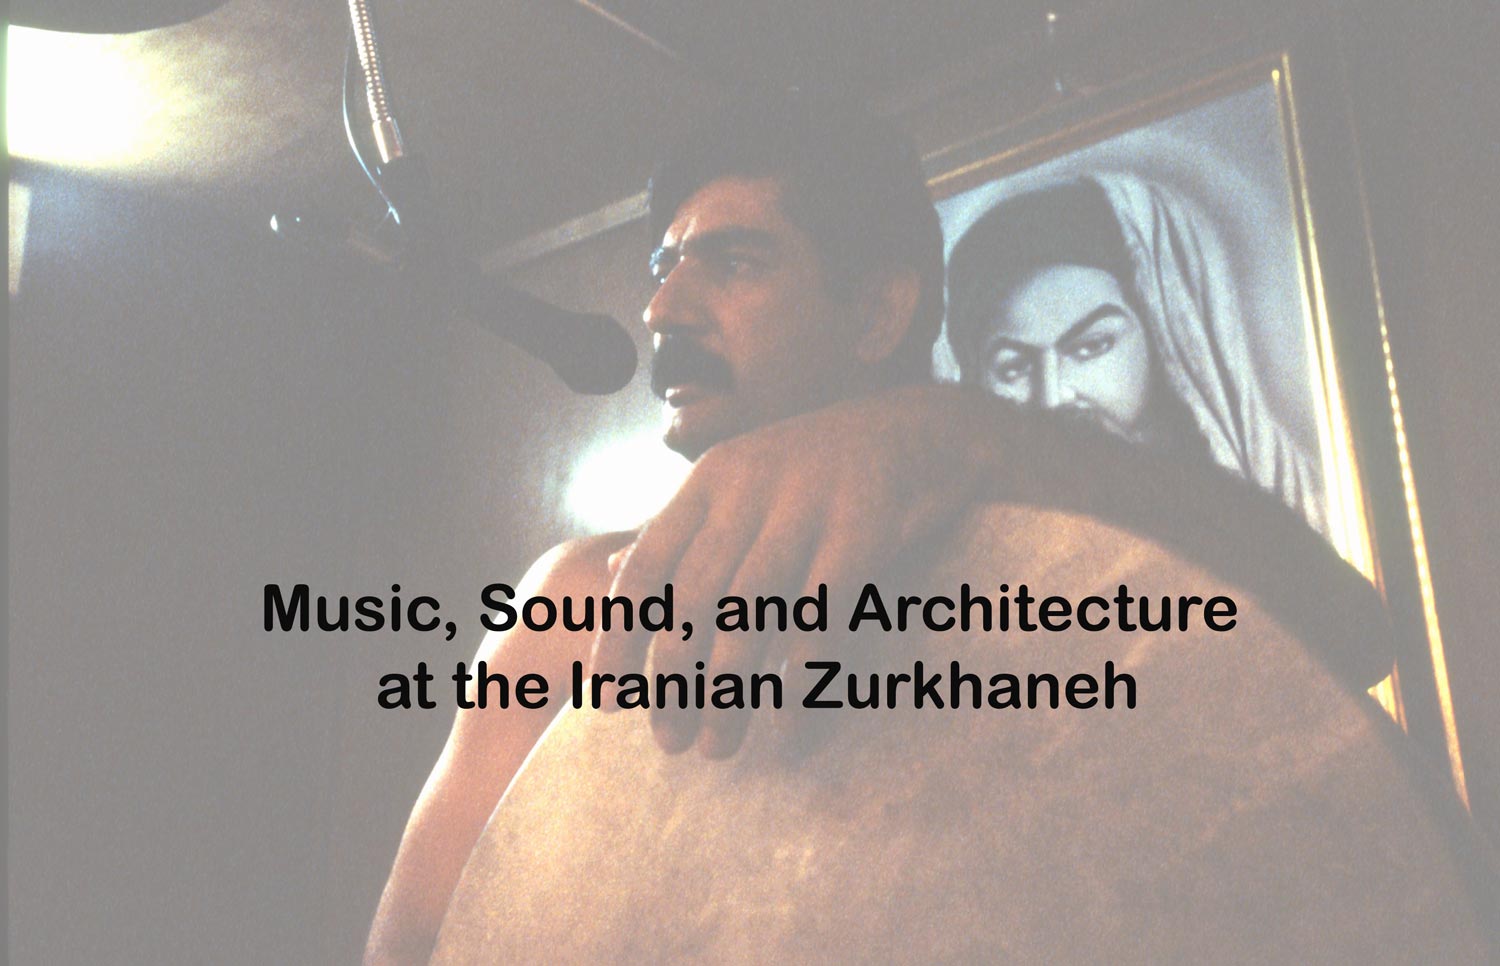 Of Mirrors and Frames: Music, Sound, and Architecture at the Iranian Zurkhaneh (Iran) 